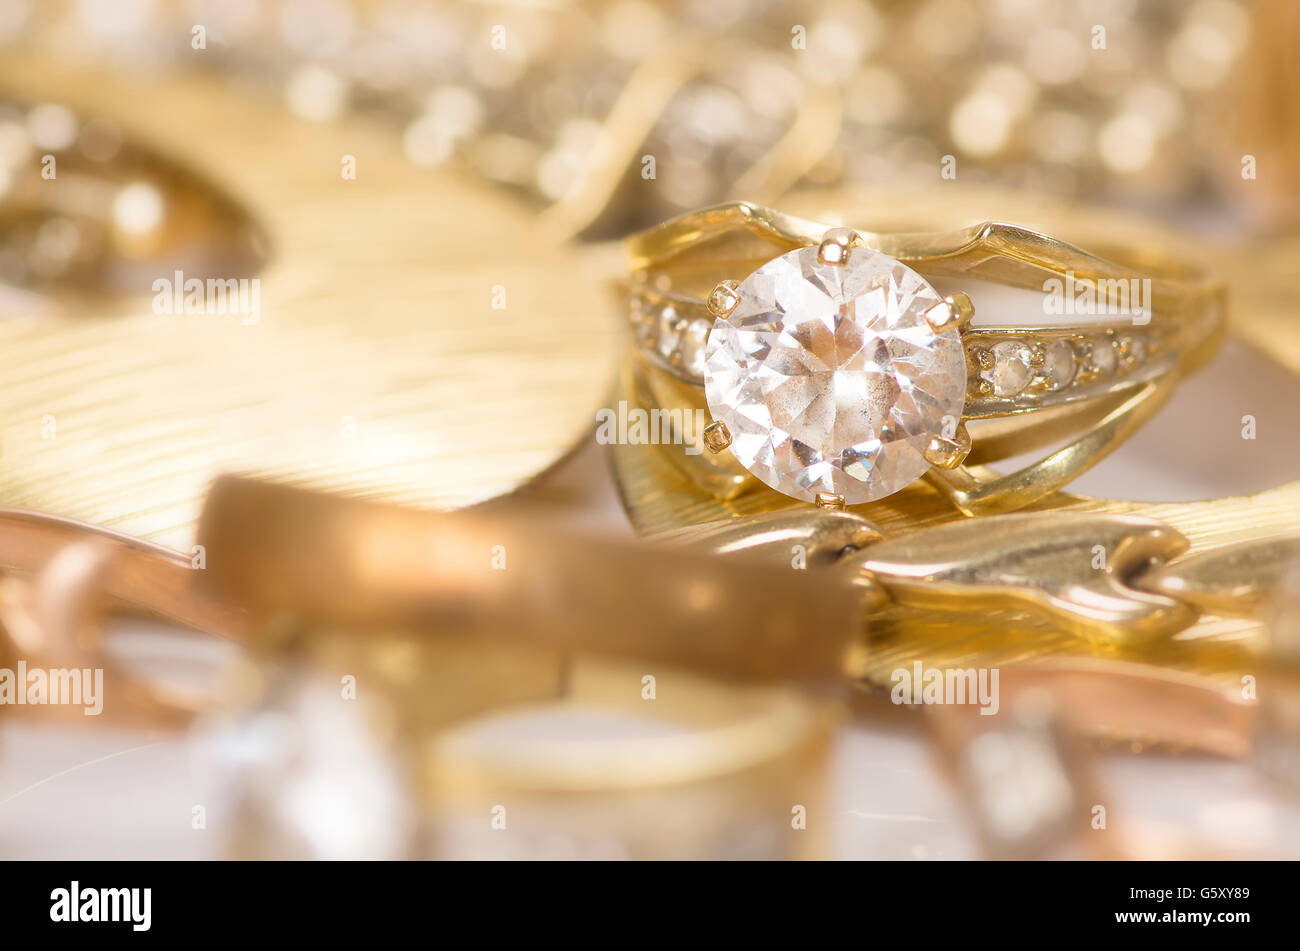 Gold jewelry on a white background Stock Photo - Alamy